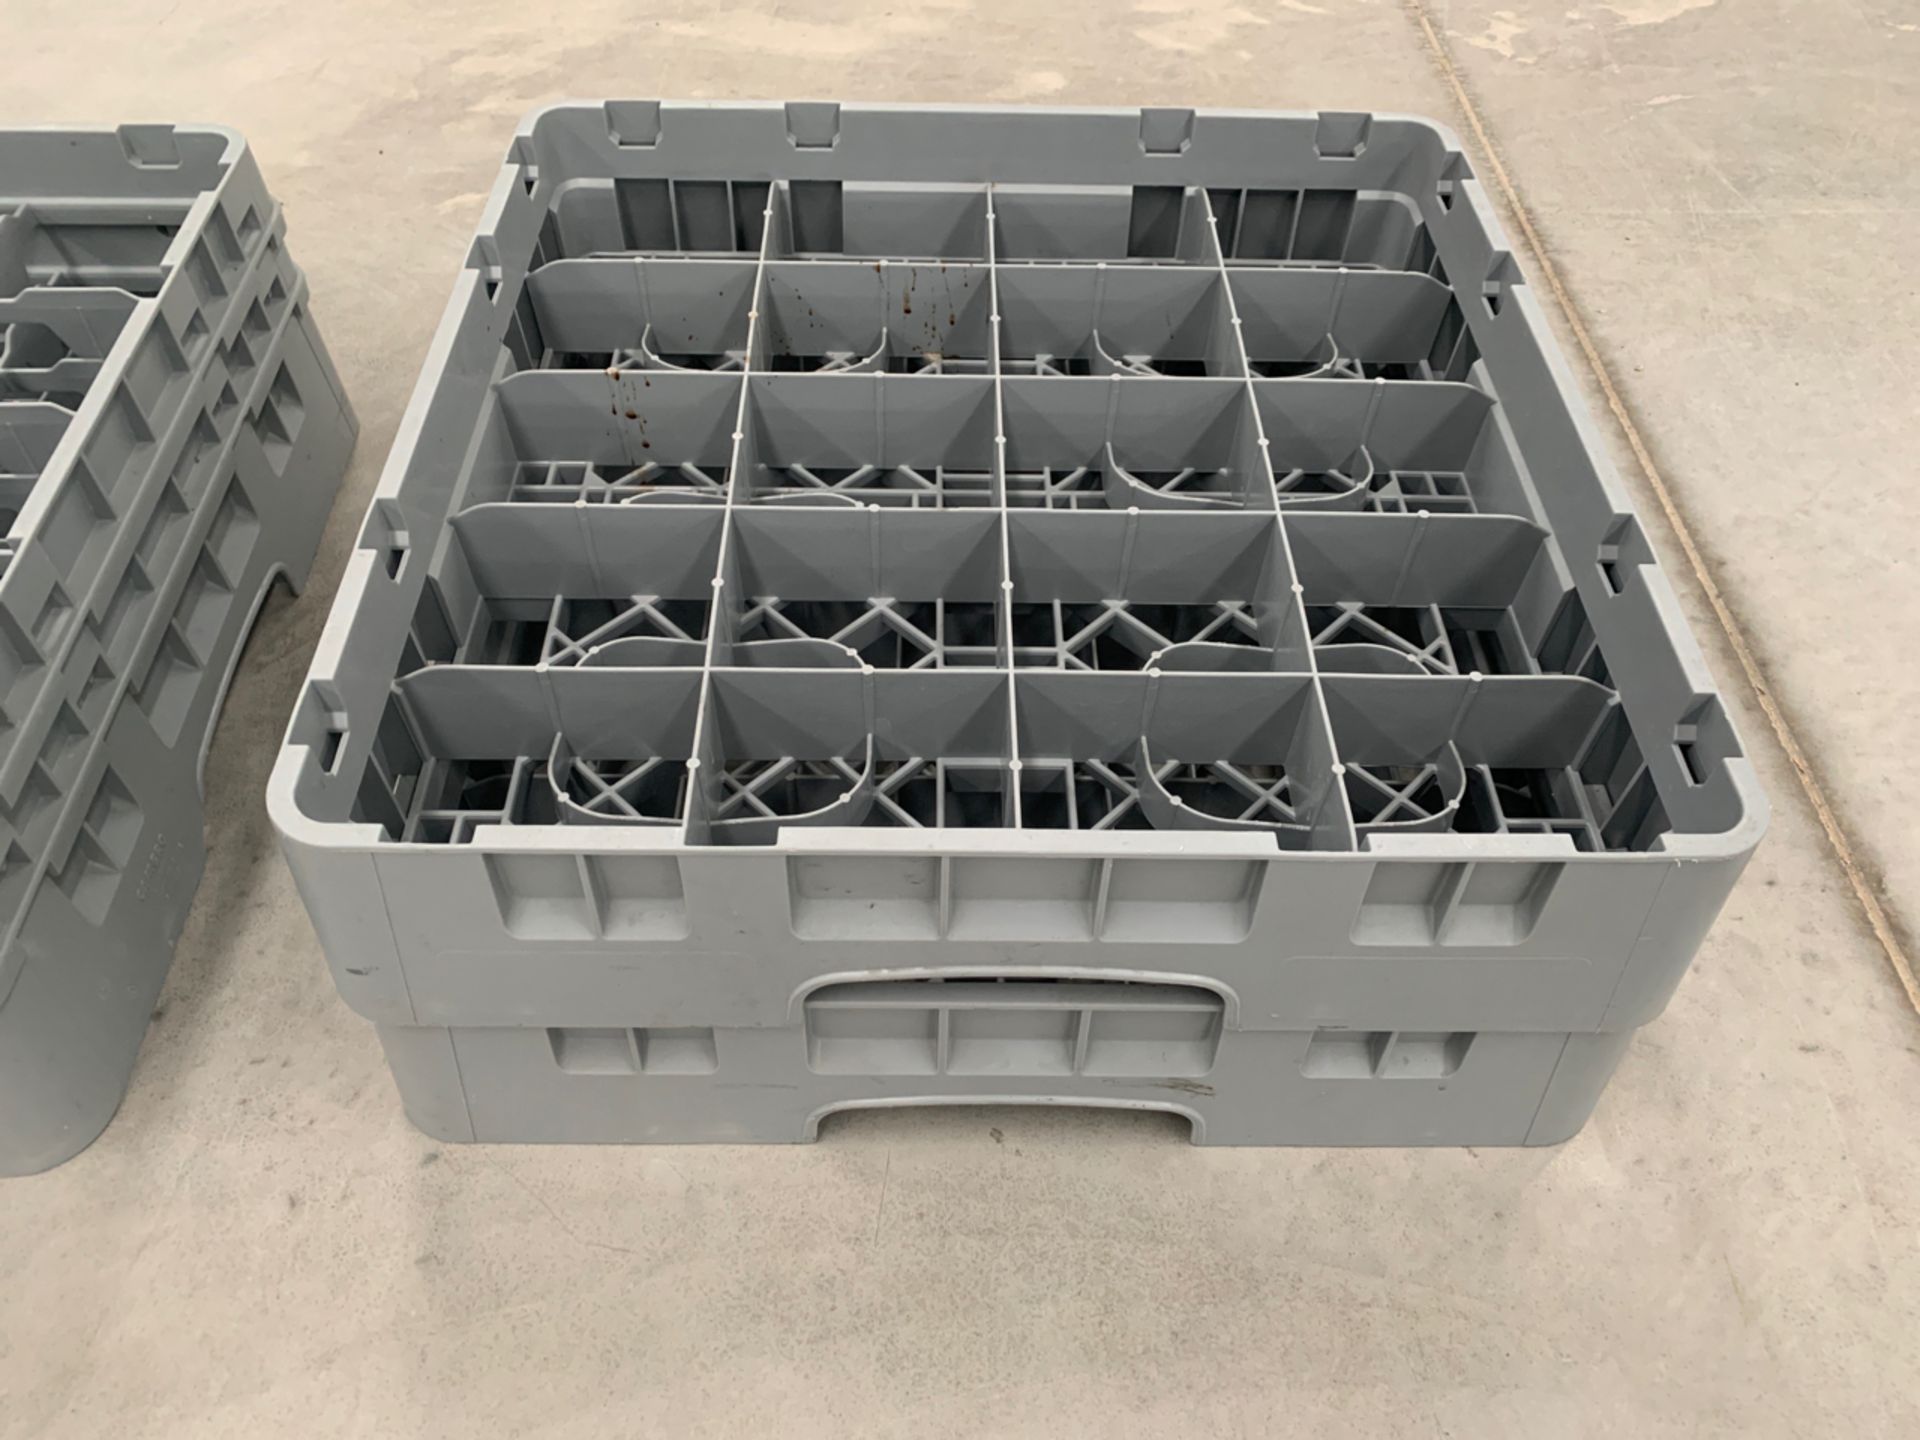 Set of 5 Cambro Various Heights Wash Baskets - Image 2 of 4